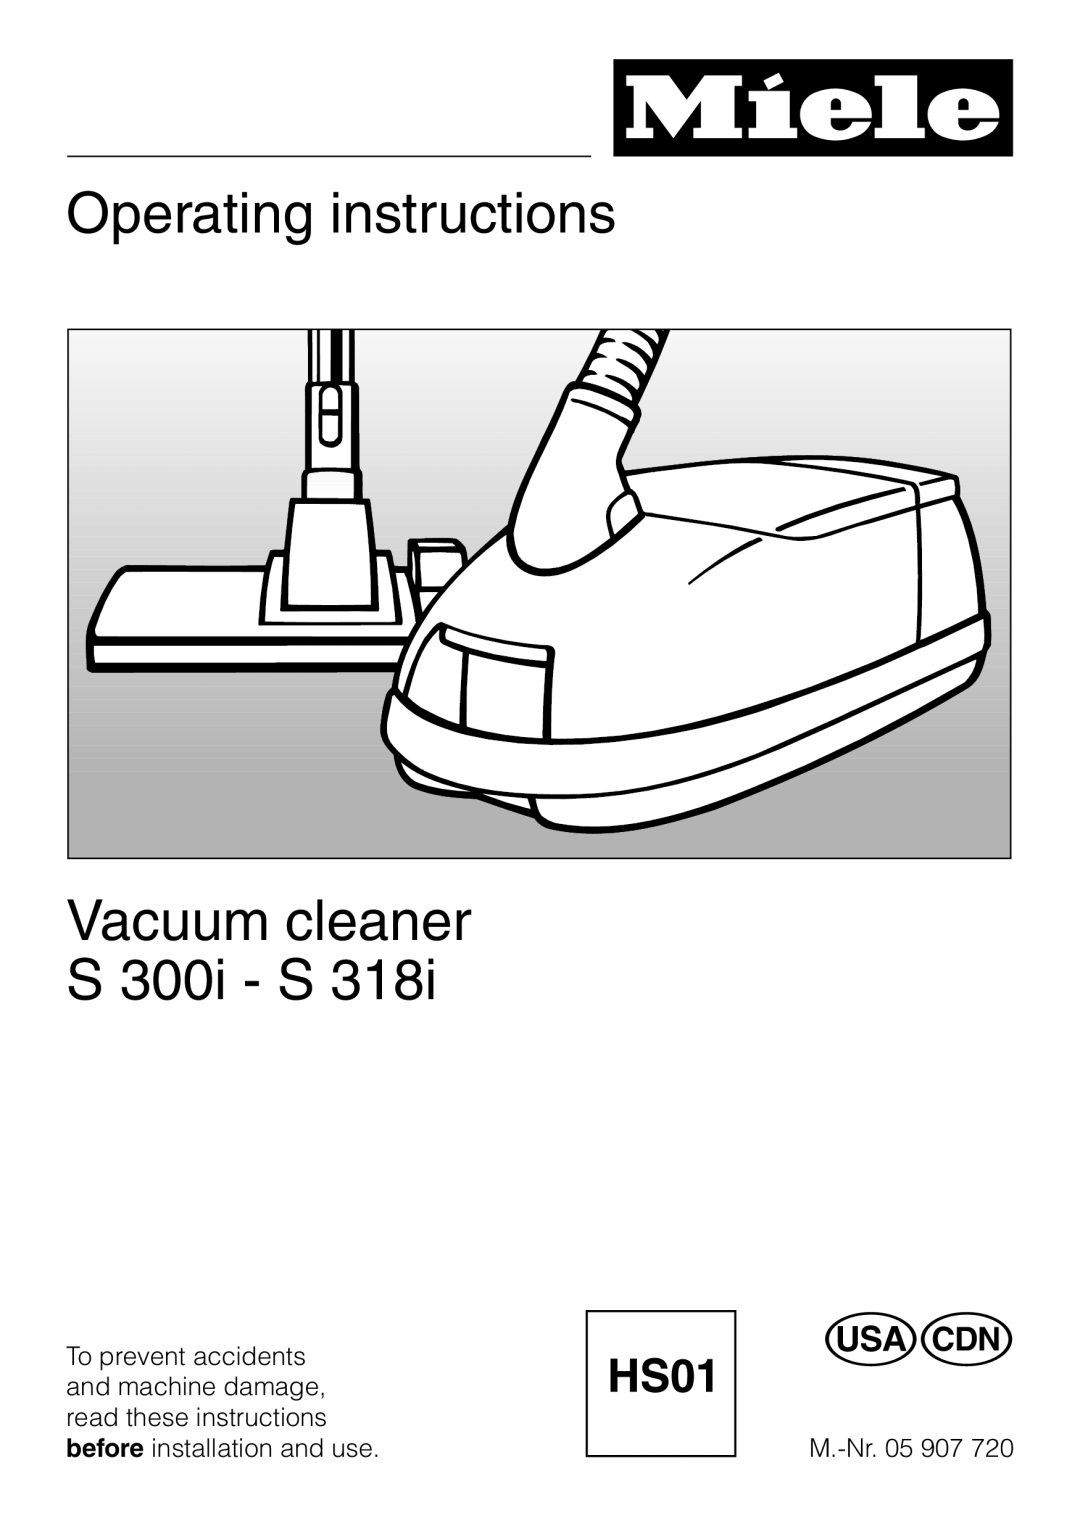 Miele S 300i - S 318i operating instructions Operating instructions, Vacuum cleaner 